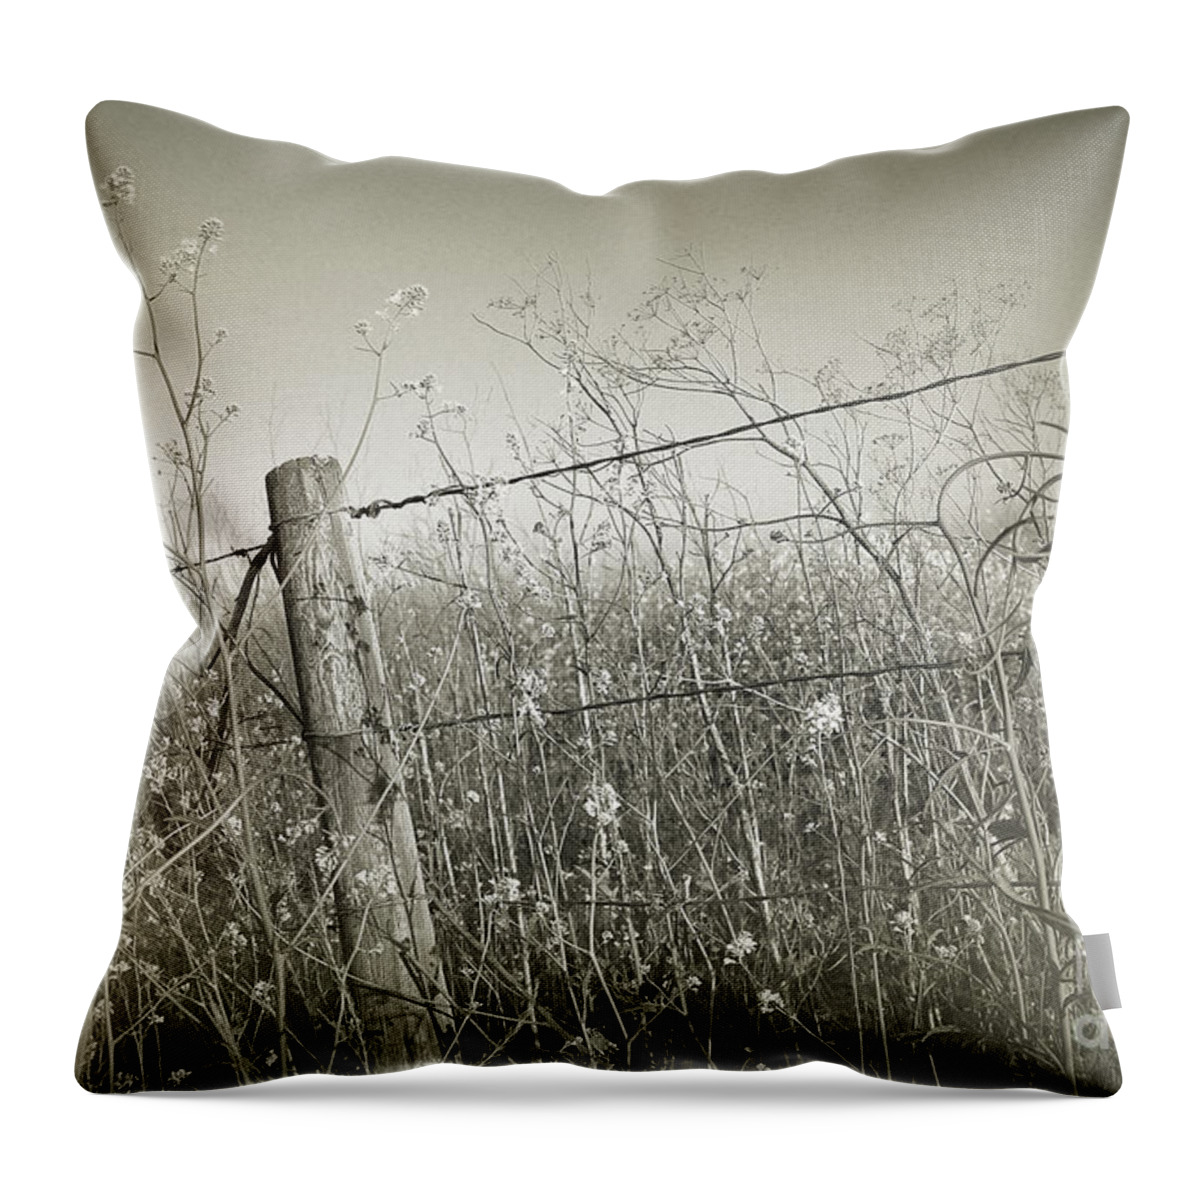 Wildflowers Throw Pillow featuring the photograph Brimming by Parrish Todd